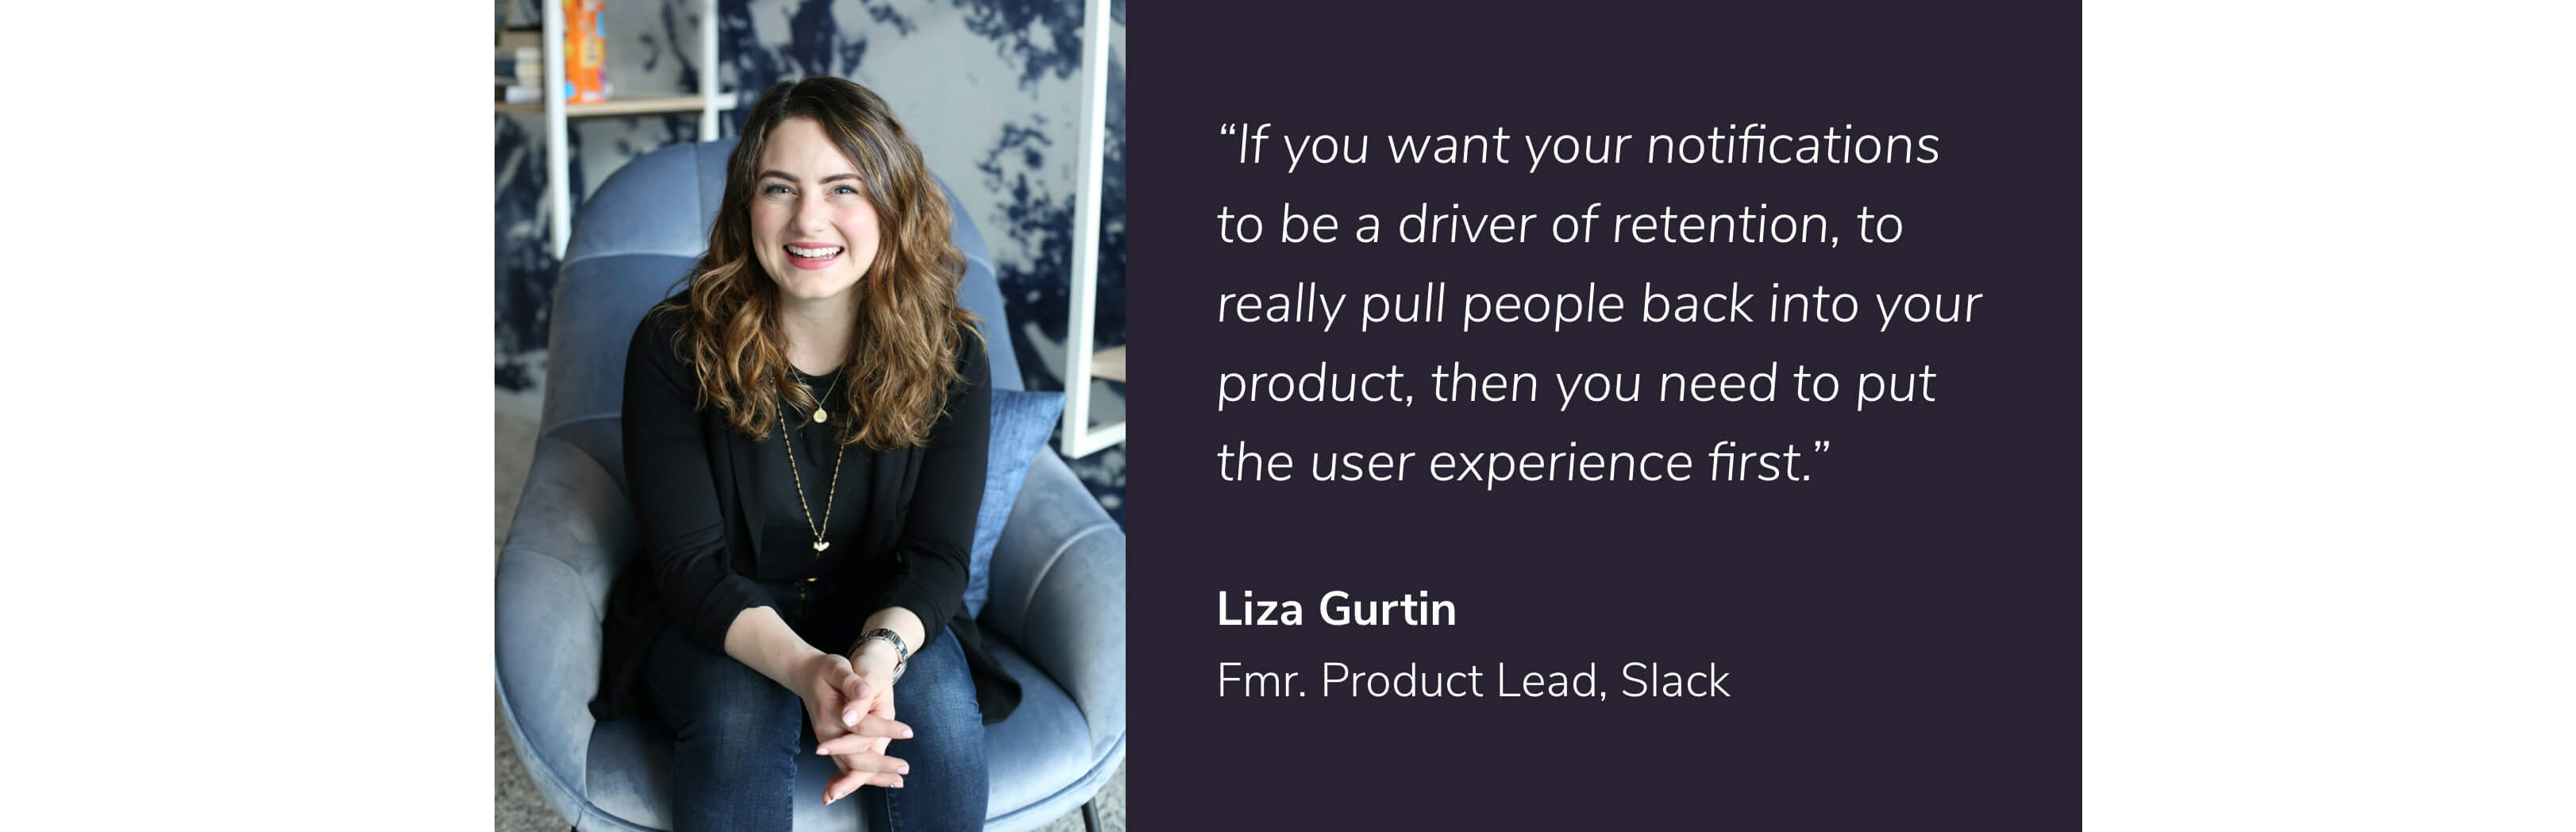 Liza Gurtin on driving growth with user notifications